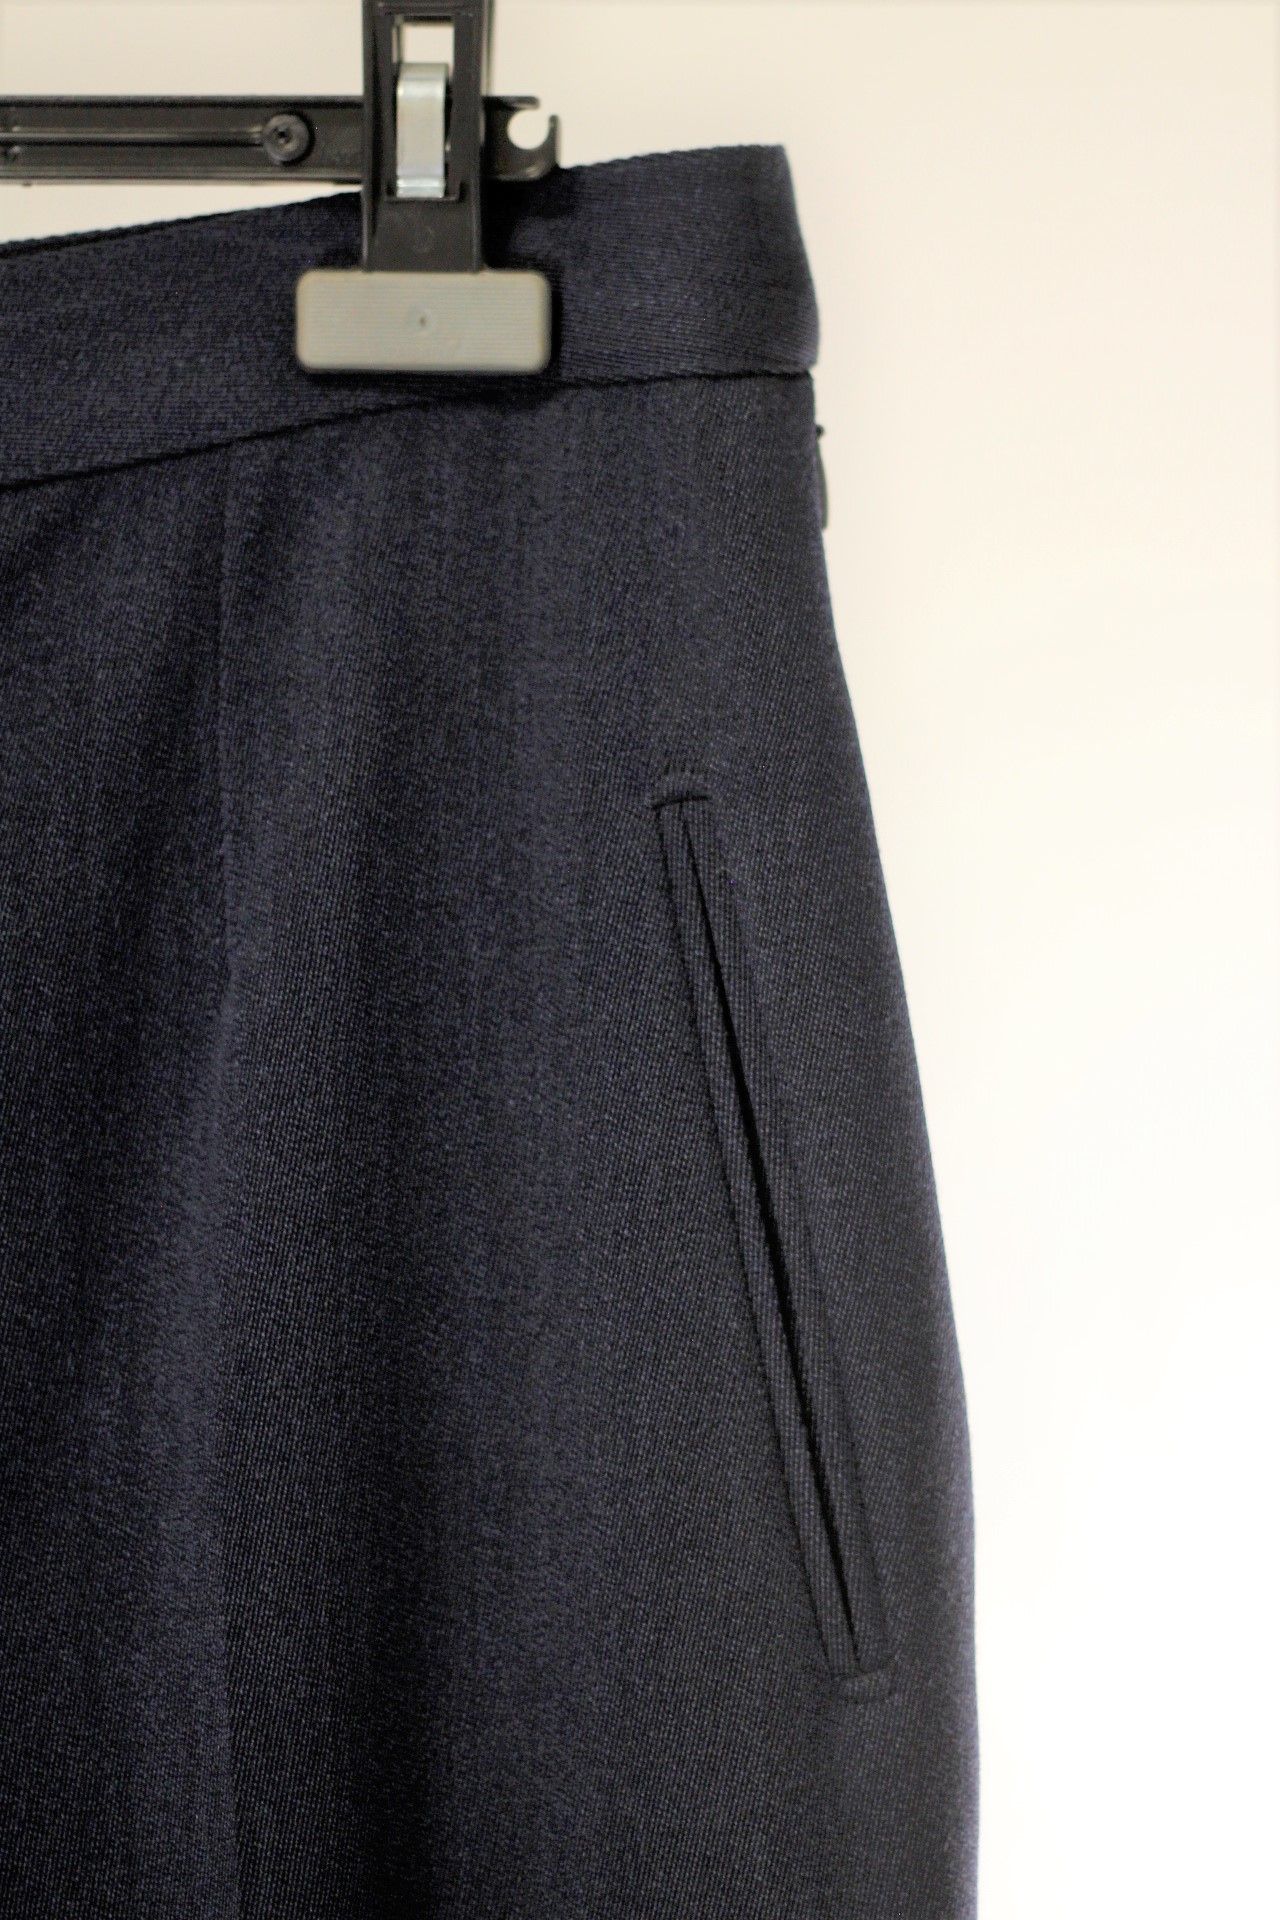 1 x Belvest Navy Trousers - Size: 26 - Material: Wool/ Cotton - From a High End Clothing Boutique In - Image 3 of 9